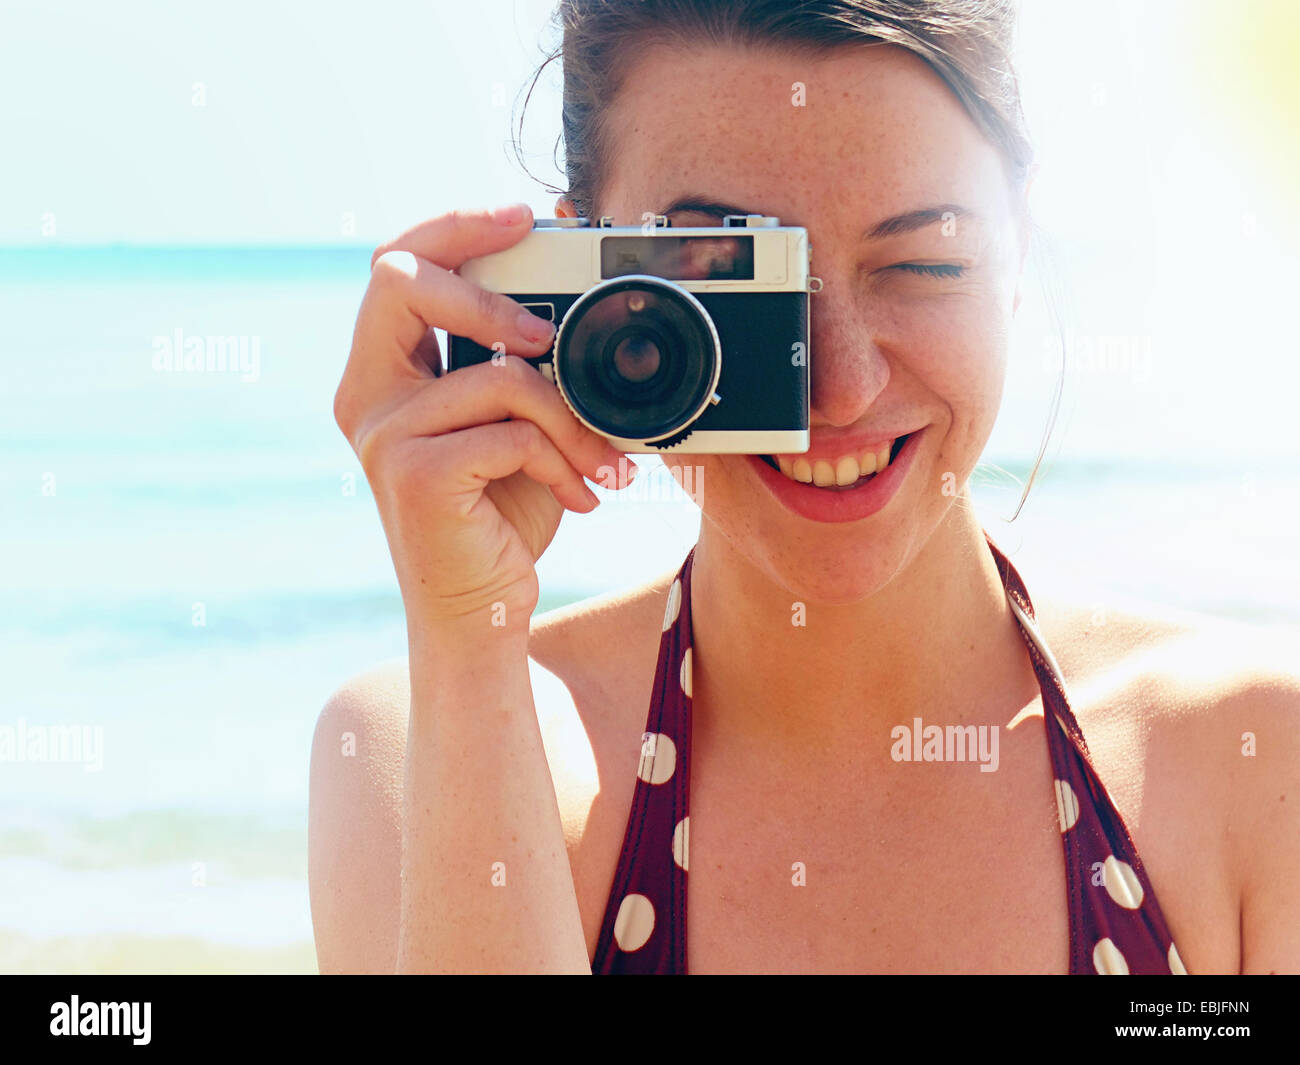 Young woman using camera on beach Stock Photo